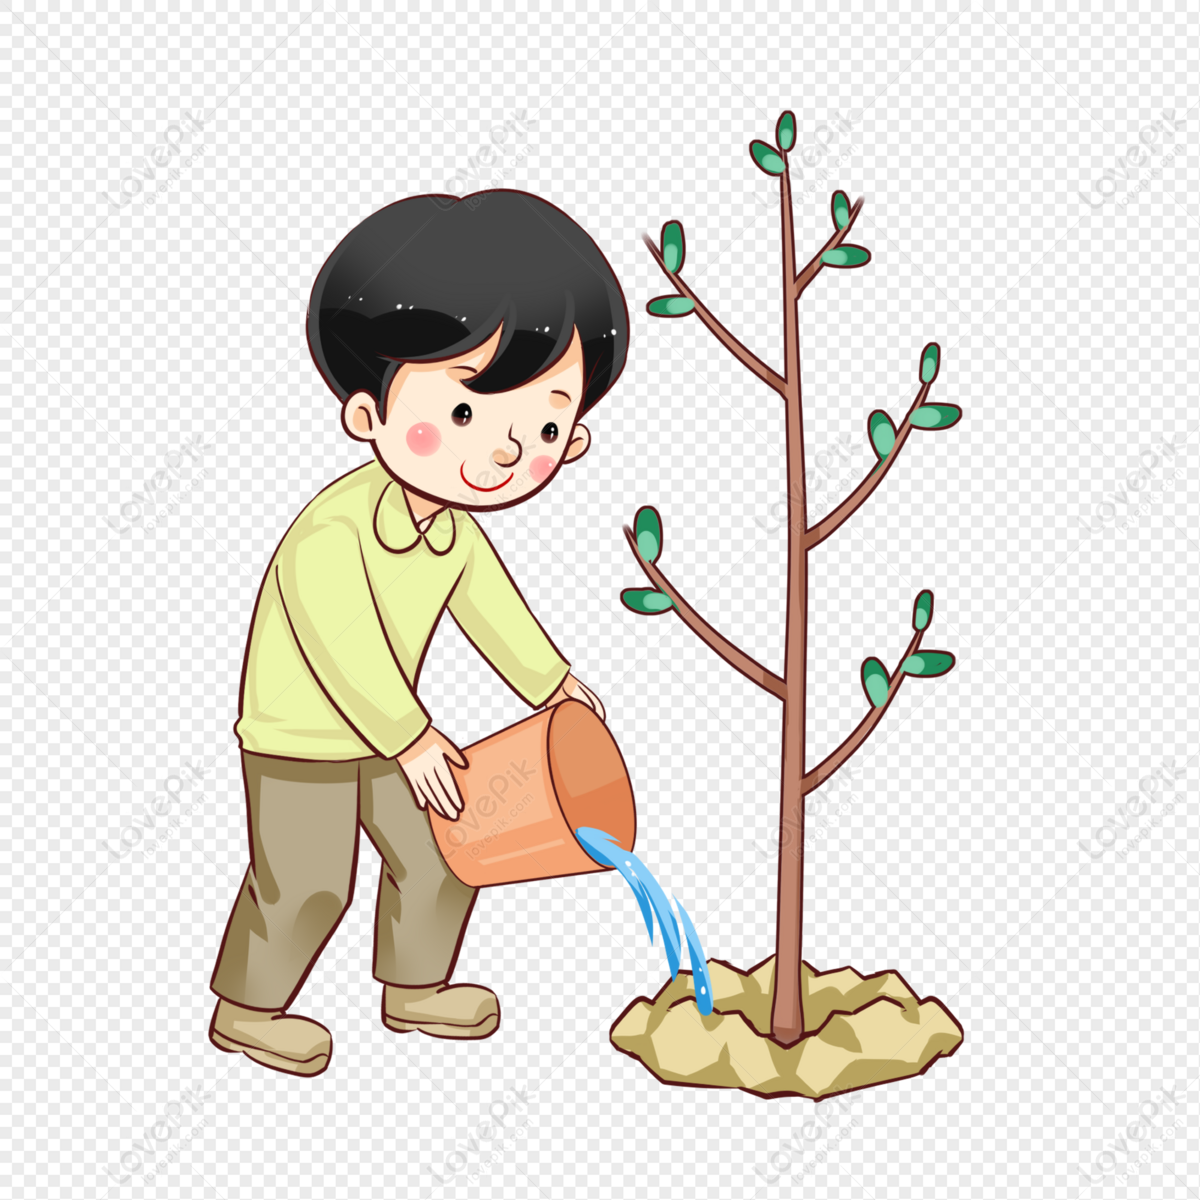 Child Planting A Tree Cliparts, Stock Vector and Royalty Free Child  Planting A Tree Illustrations